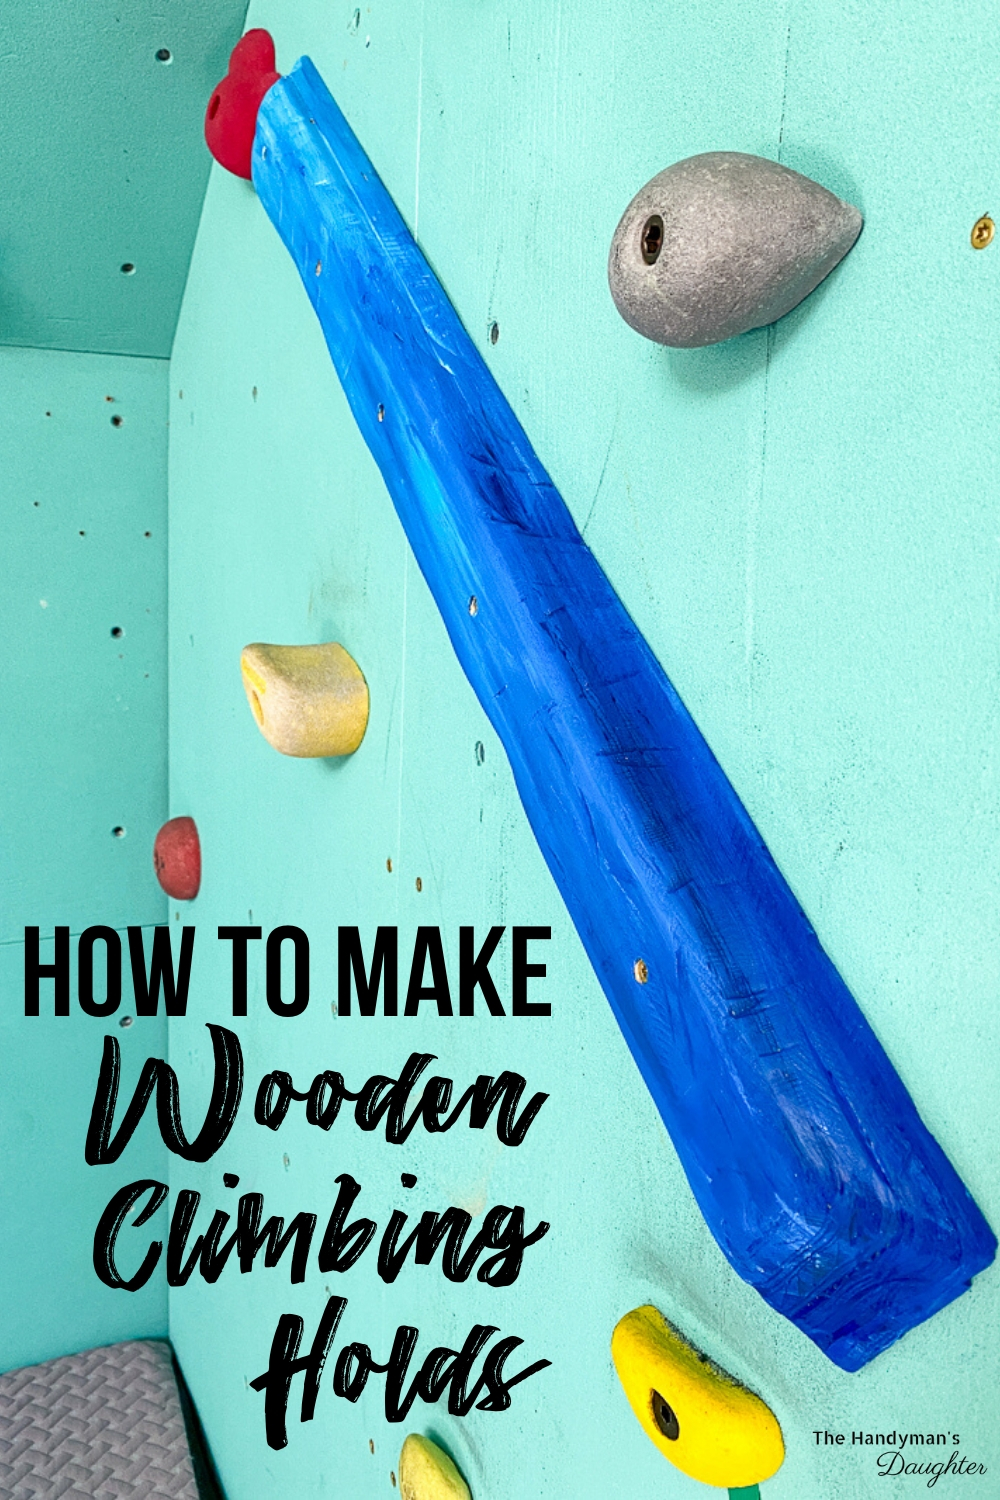 How to make wooden climbing holds